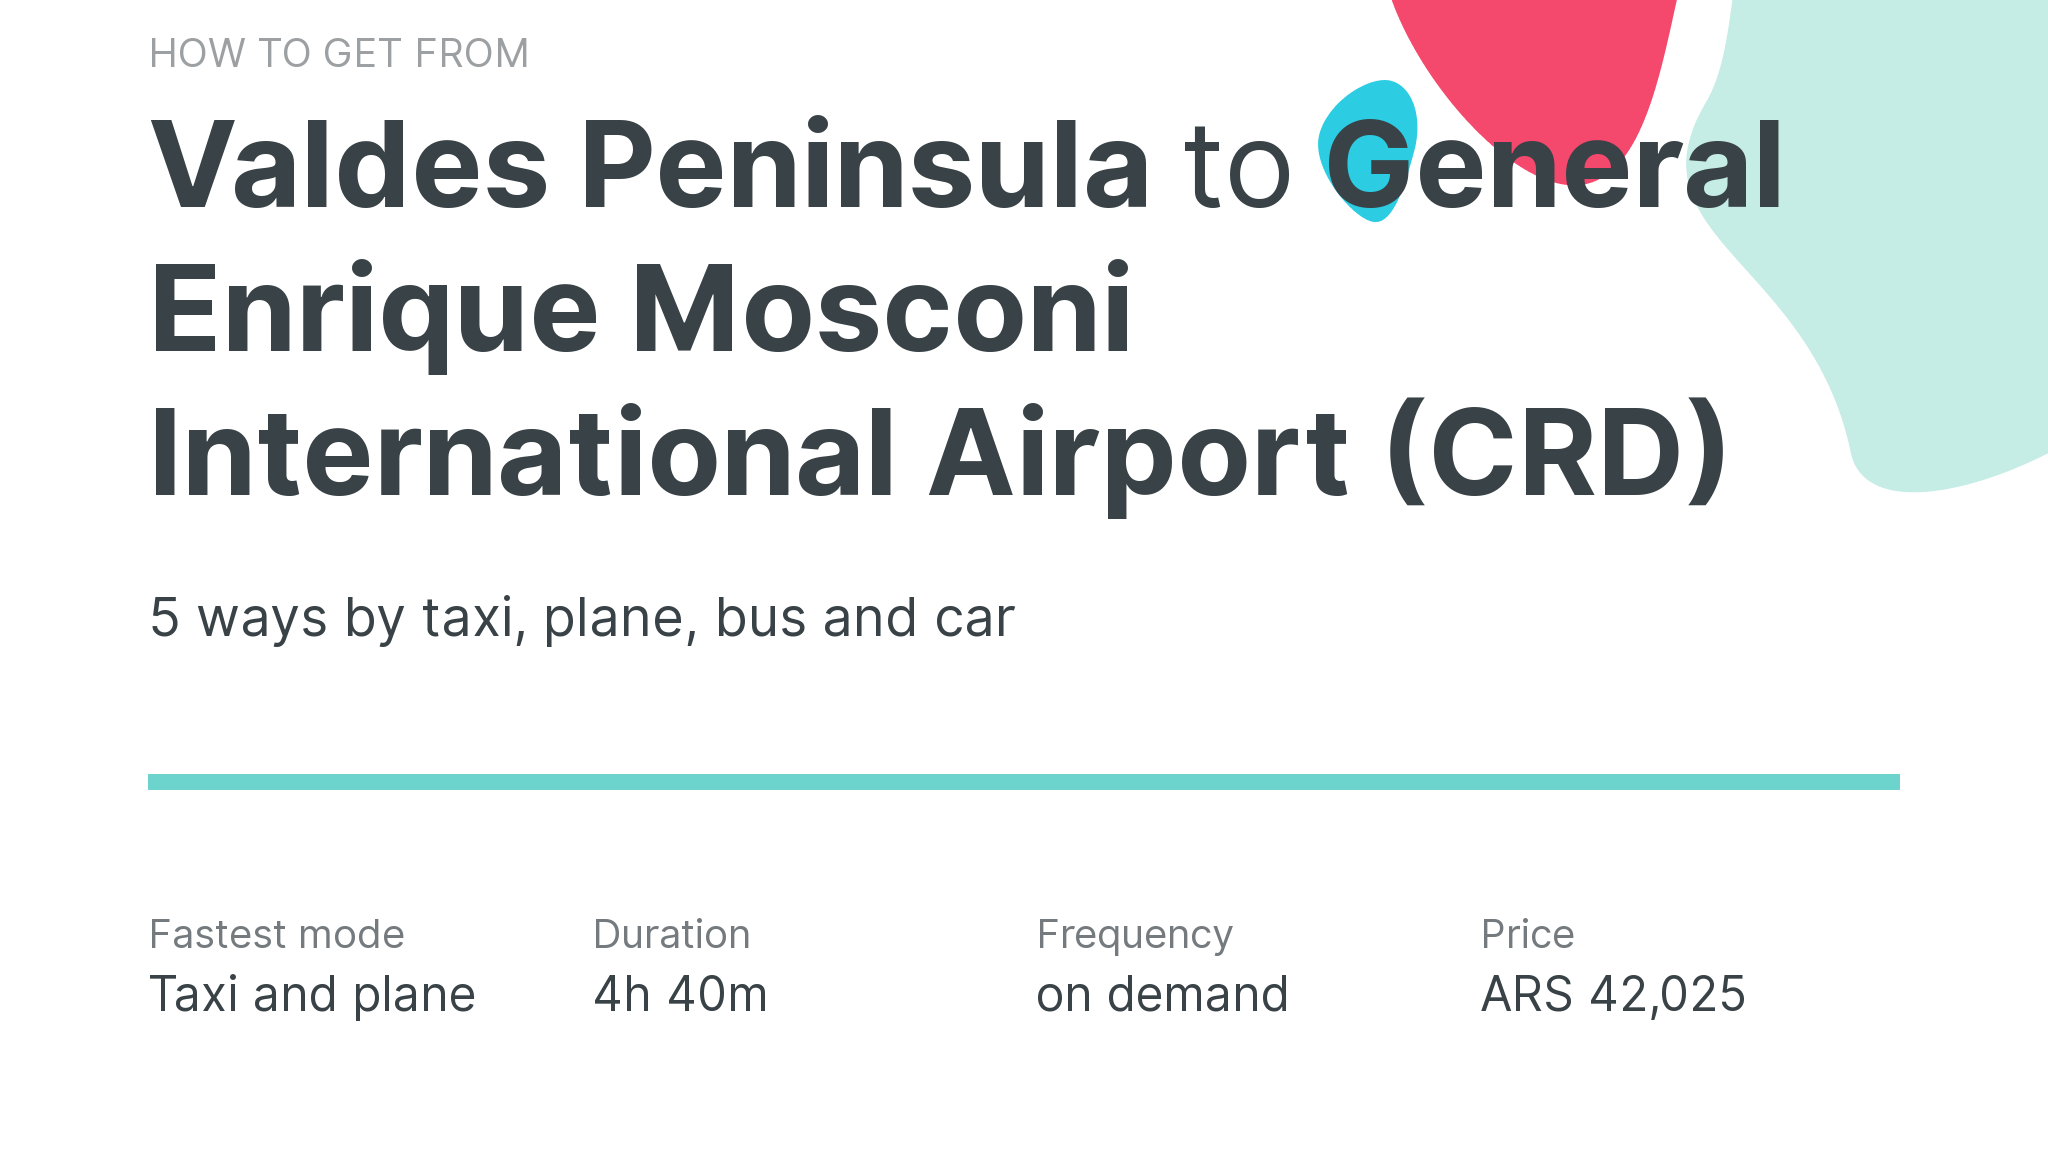 How do I get from Valdes Peninsula to General Enrique Mosconi International Airport (CRD)